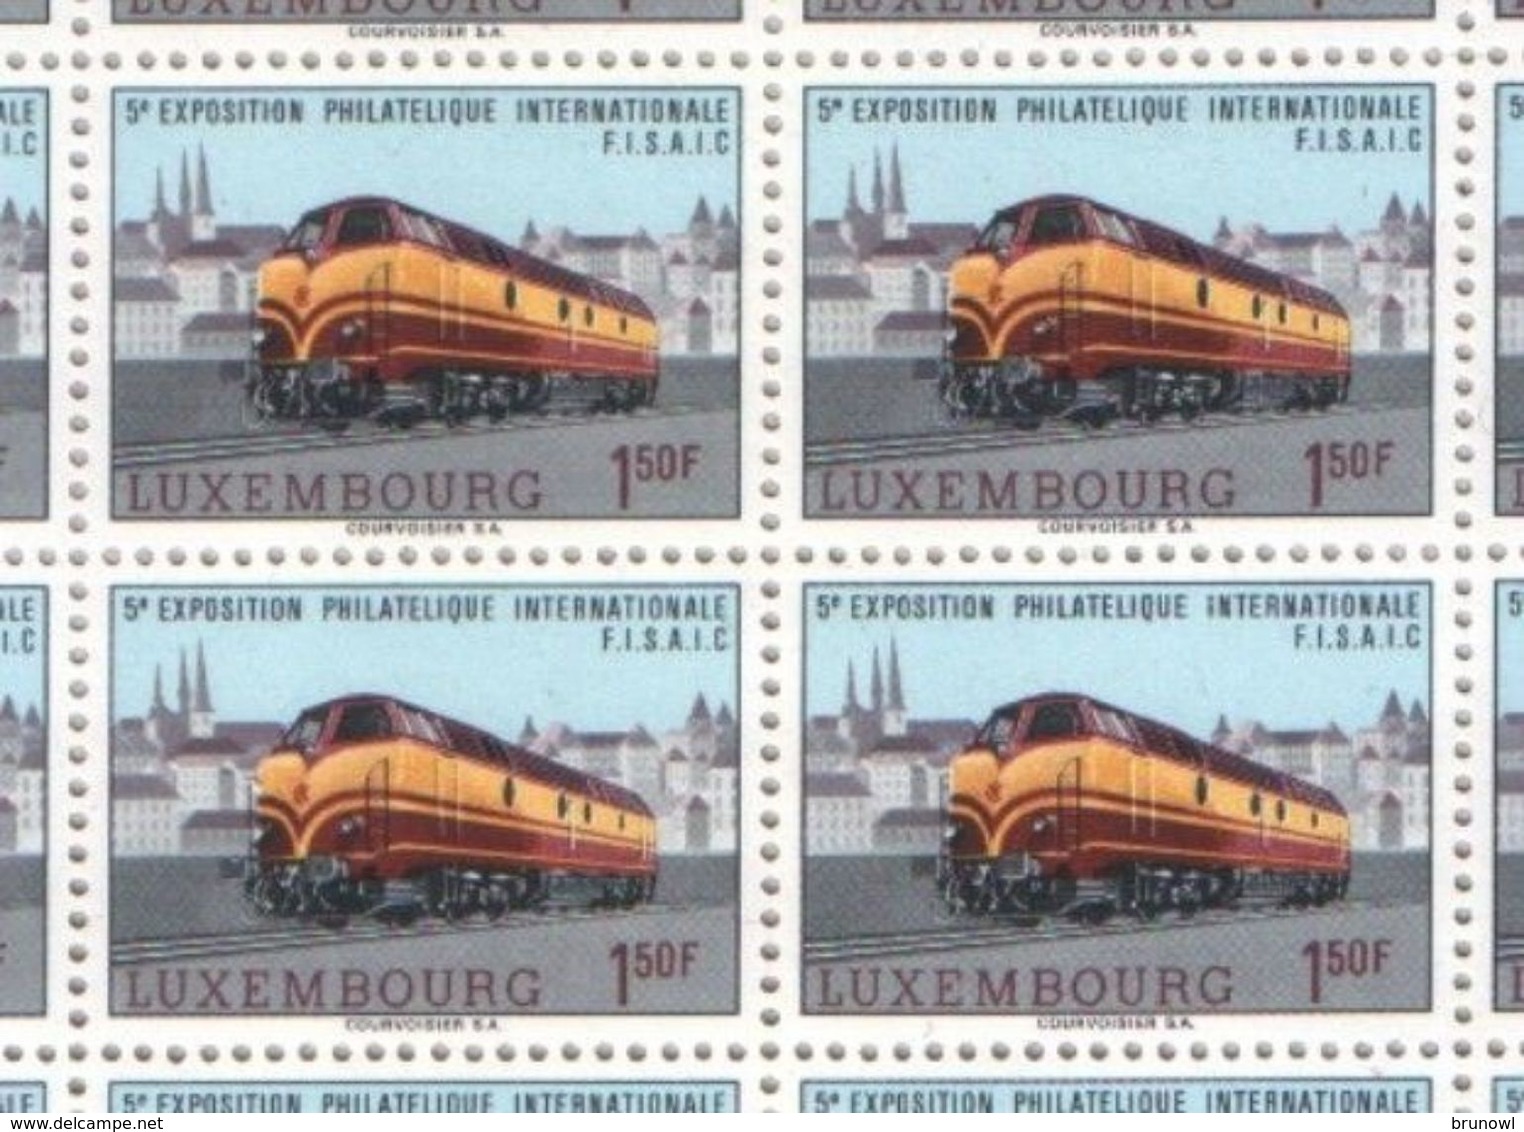 Luxembourg 1966 Two Sheets Of Philatelic Exhibition Stamps Featuring Trains MNH - Full Sheets